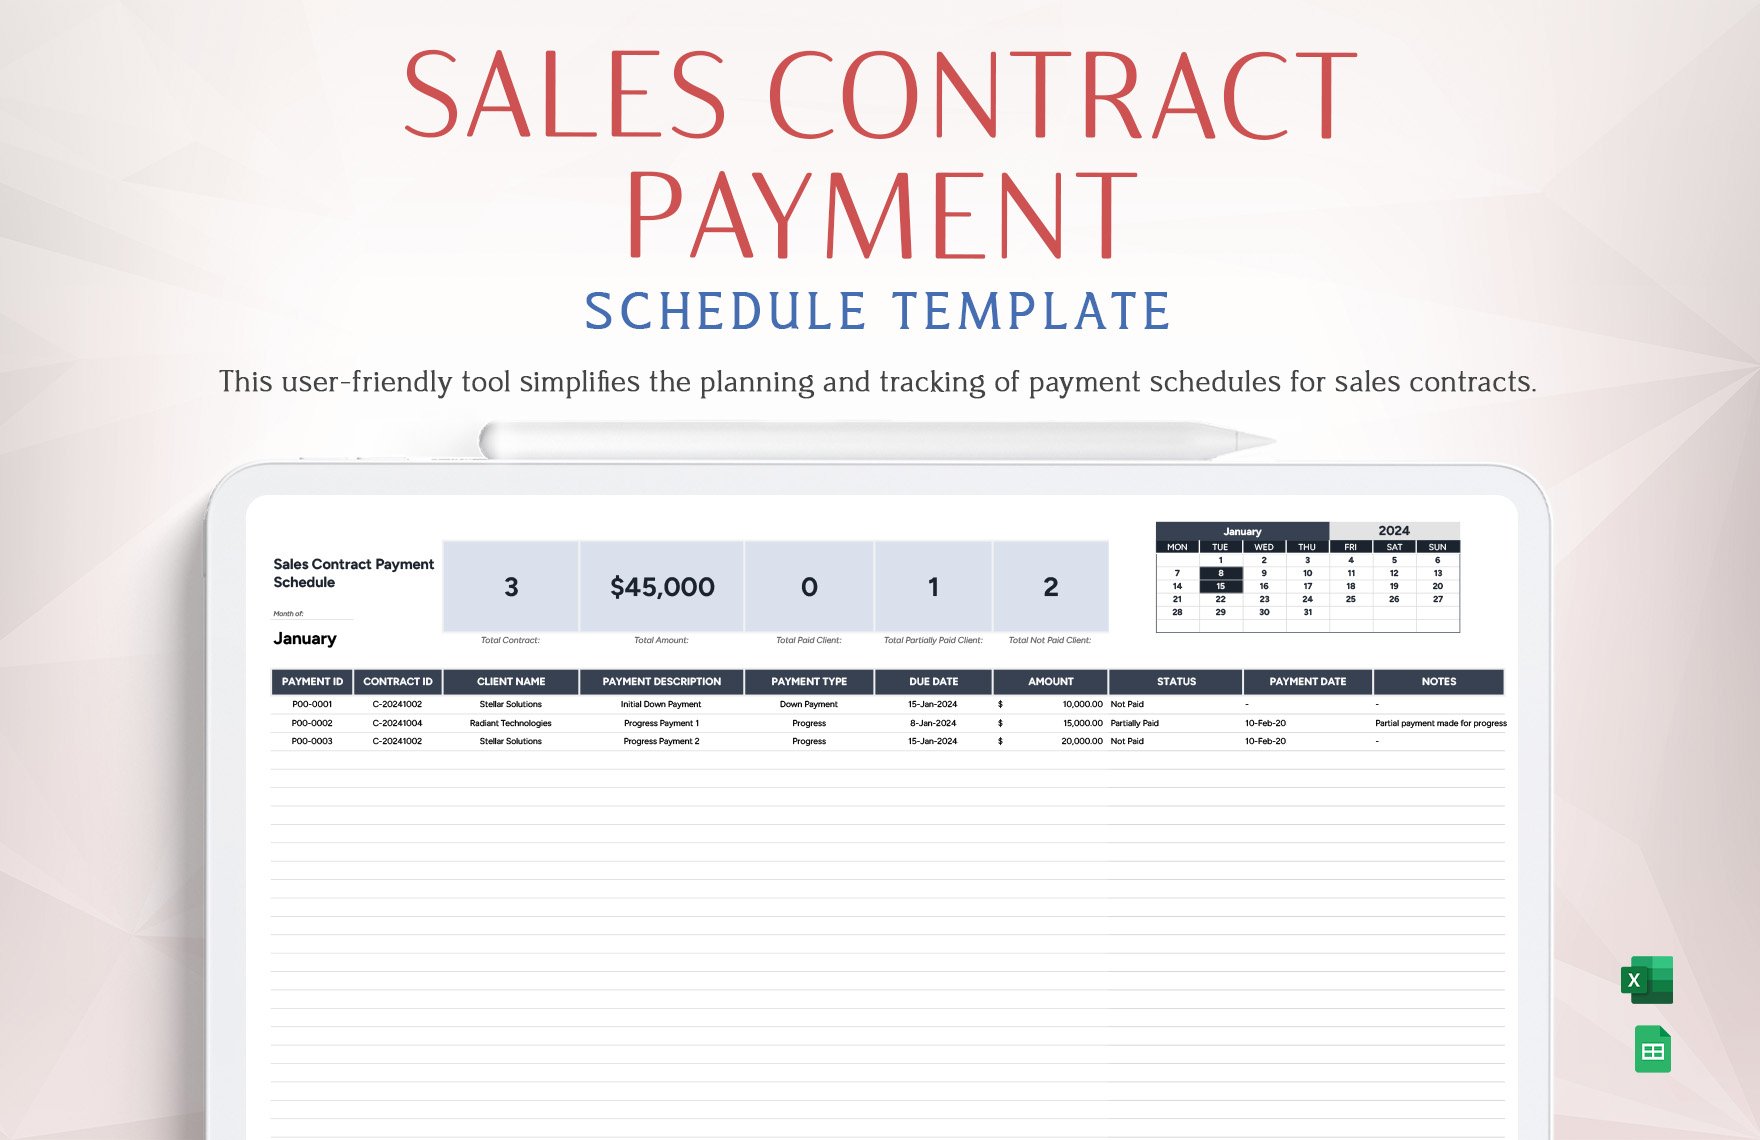 Sales Contract Payment Schedule Template in Excel, Google Sheets